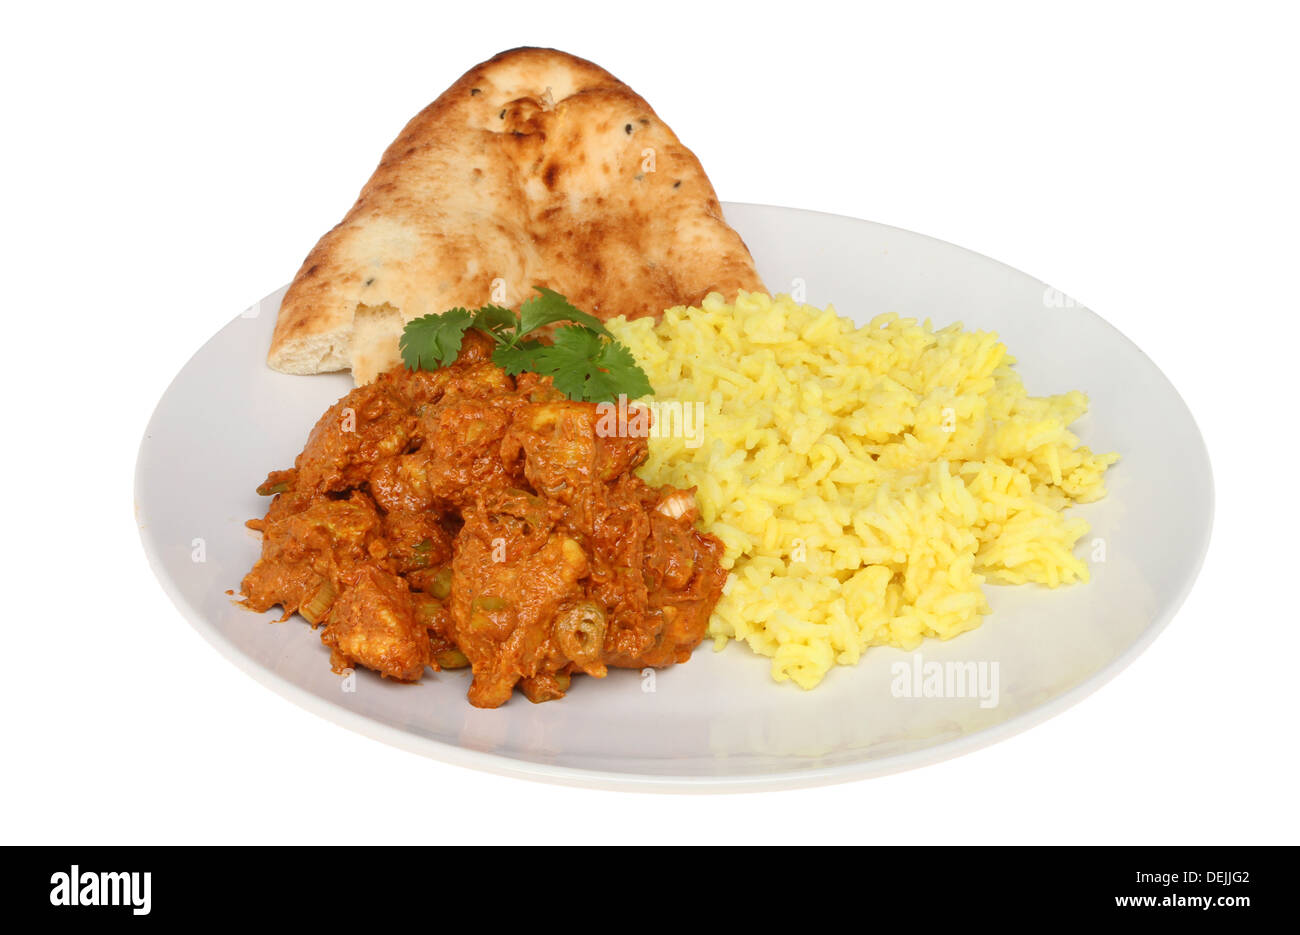 https://c8.alamy.com/comp/DEJJG2/chicken-tikka-masala-with-rice-and-naan-bread-on-a-plate-isolated-DEJJG2.jpg